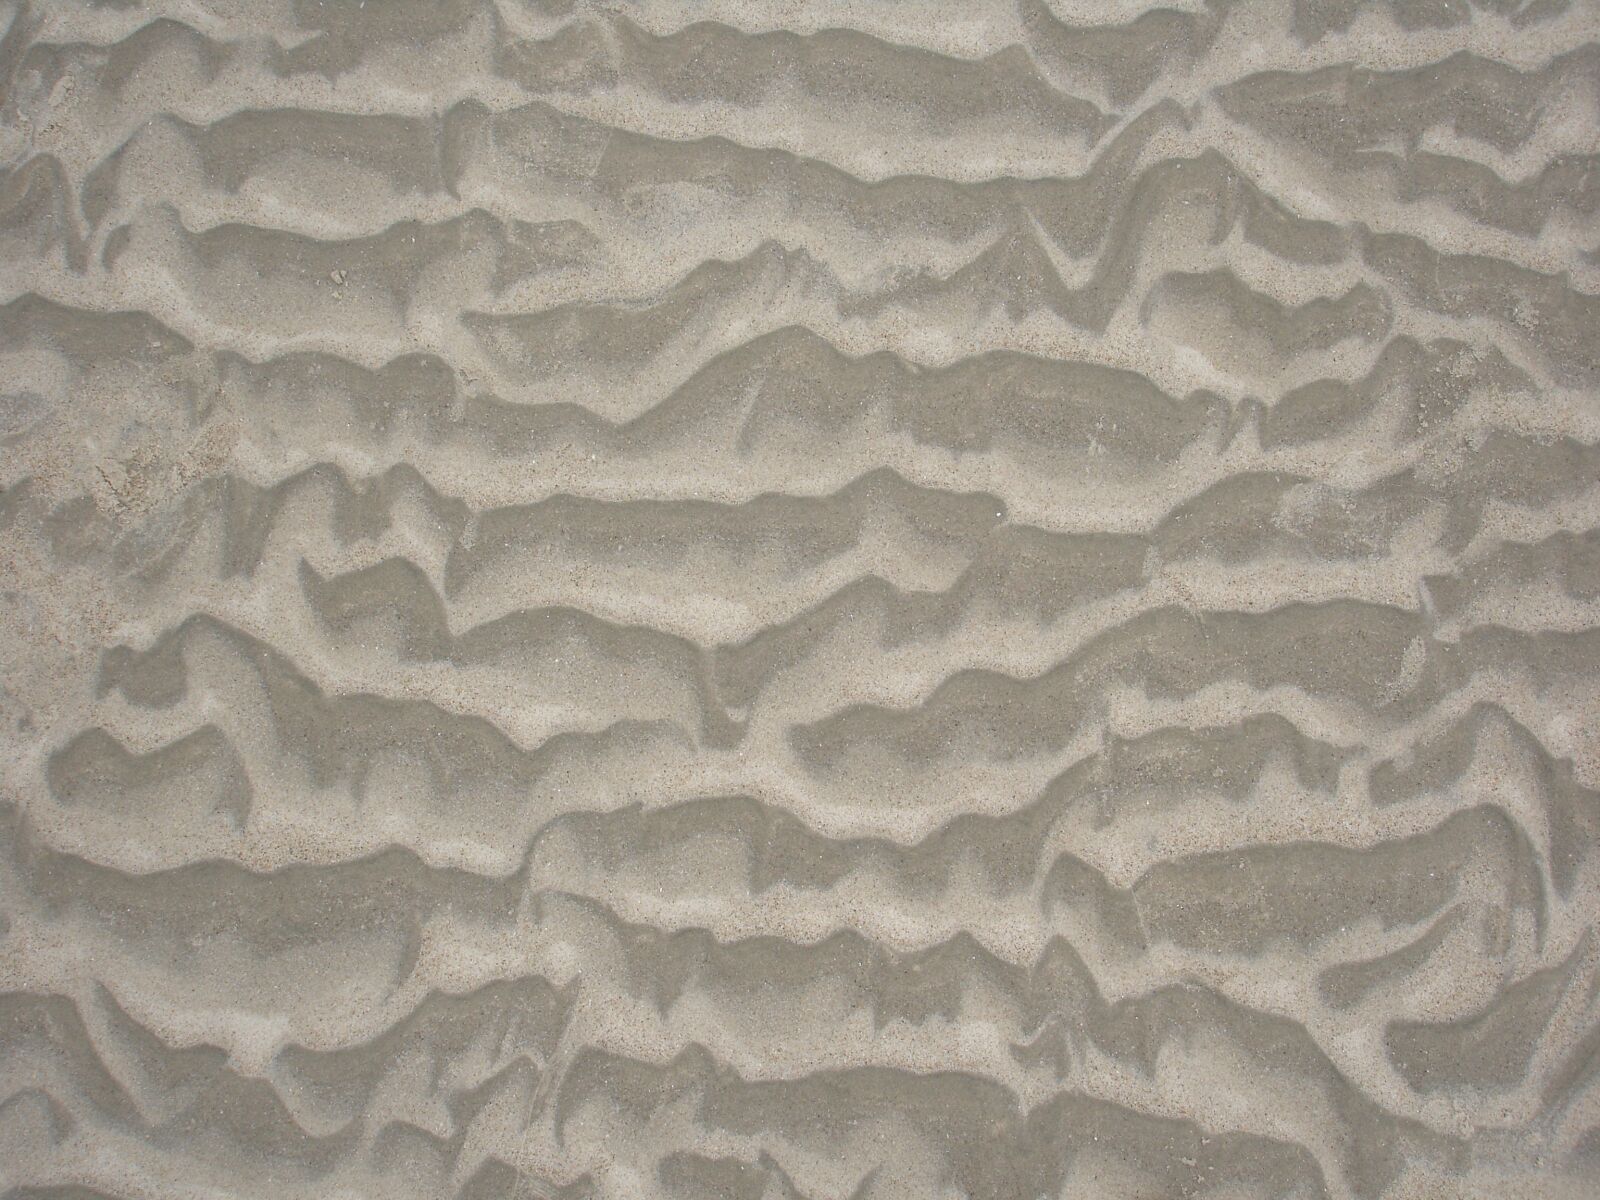 Sony DSC-P200 sample photo. Sand and four of photography